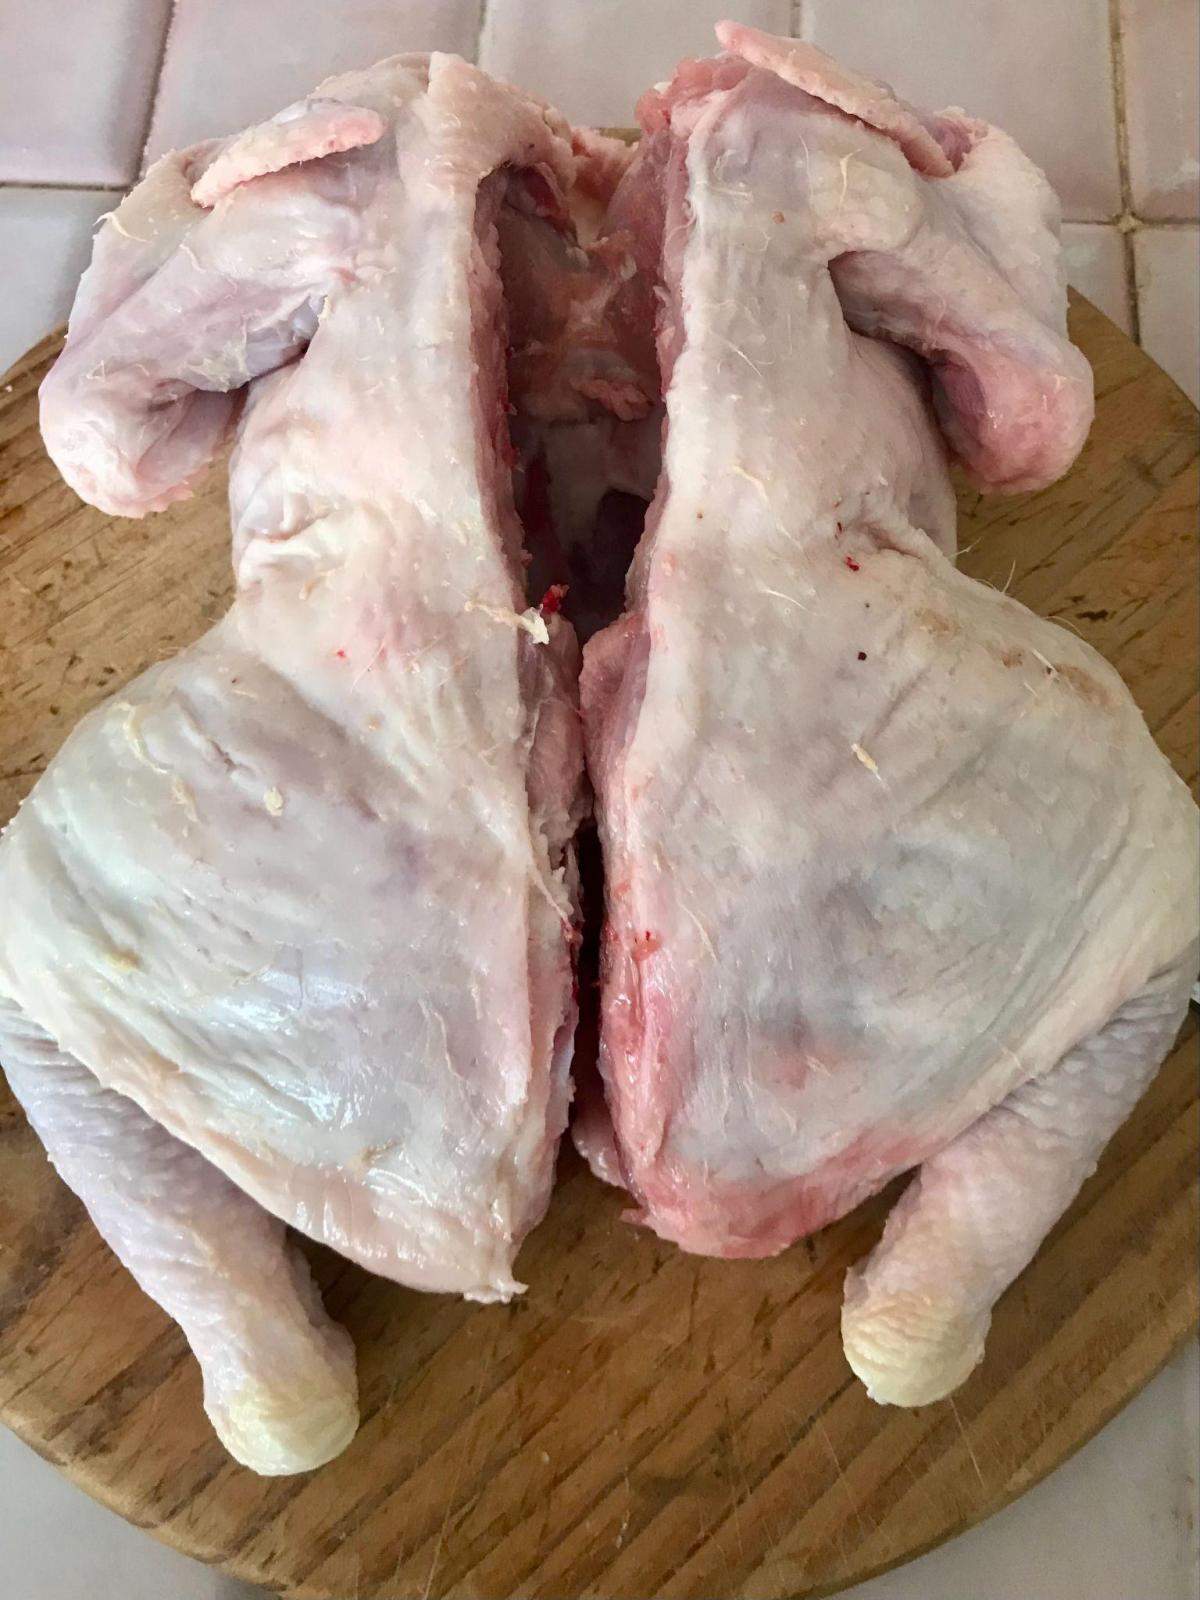 Chicken with backbone removed on wooden board.